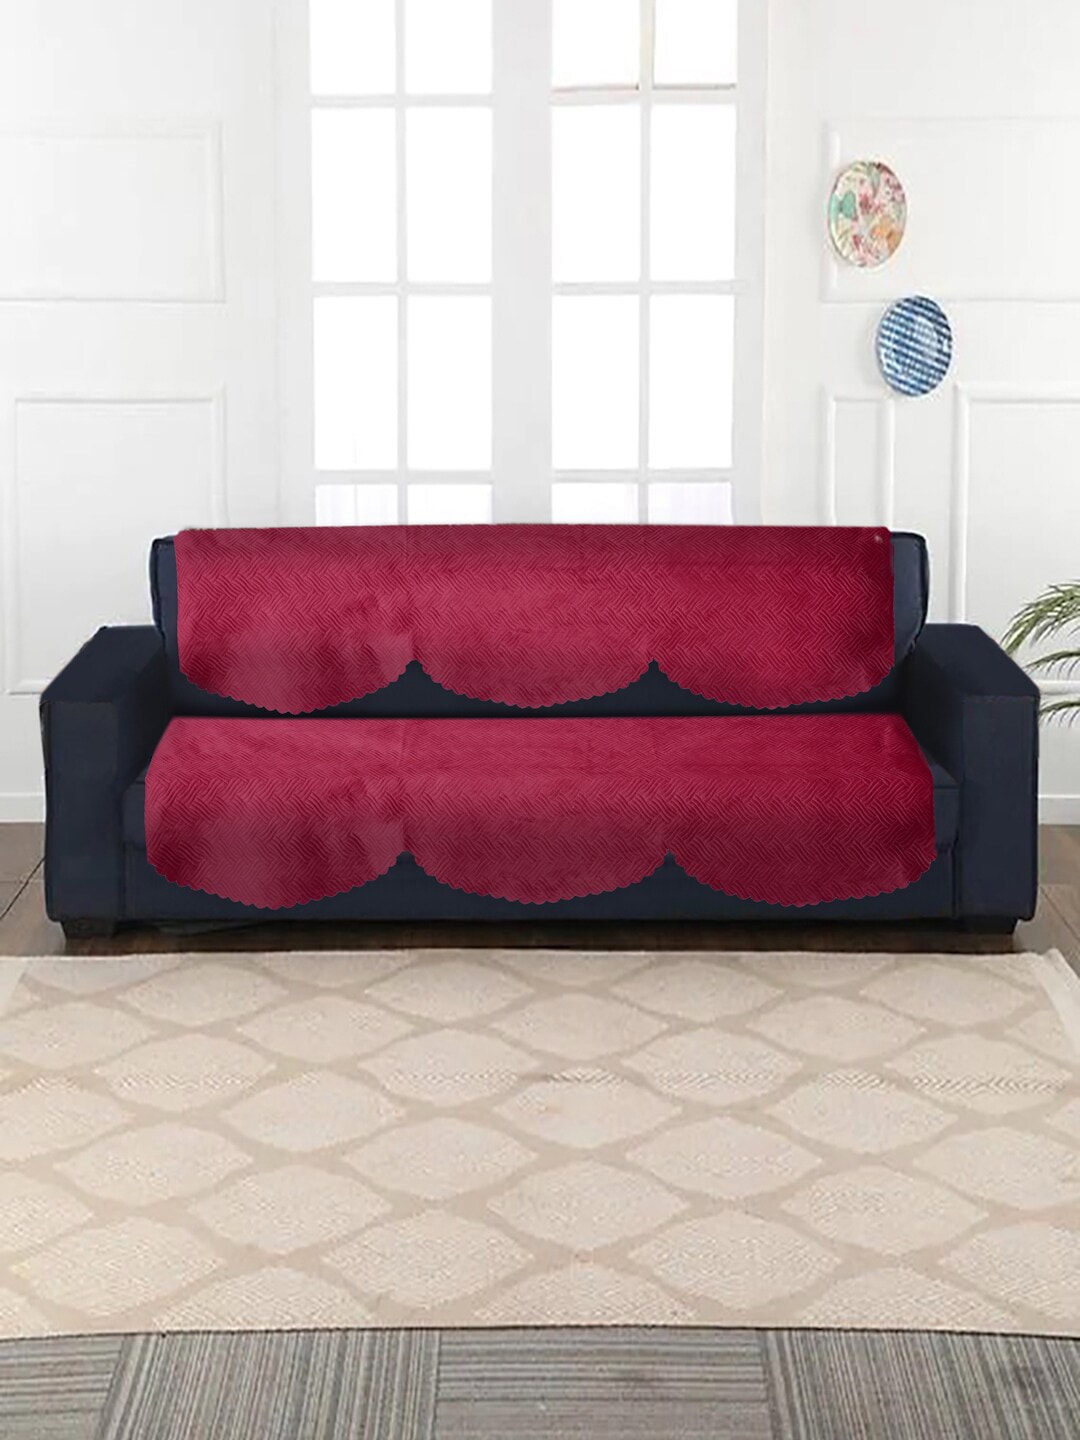 HOSTA HOMES Maroon 5-Seater Quilted Jacquard Velvet Sofa Cover Price in India